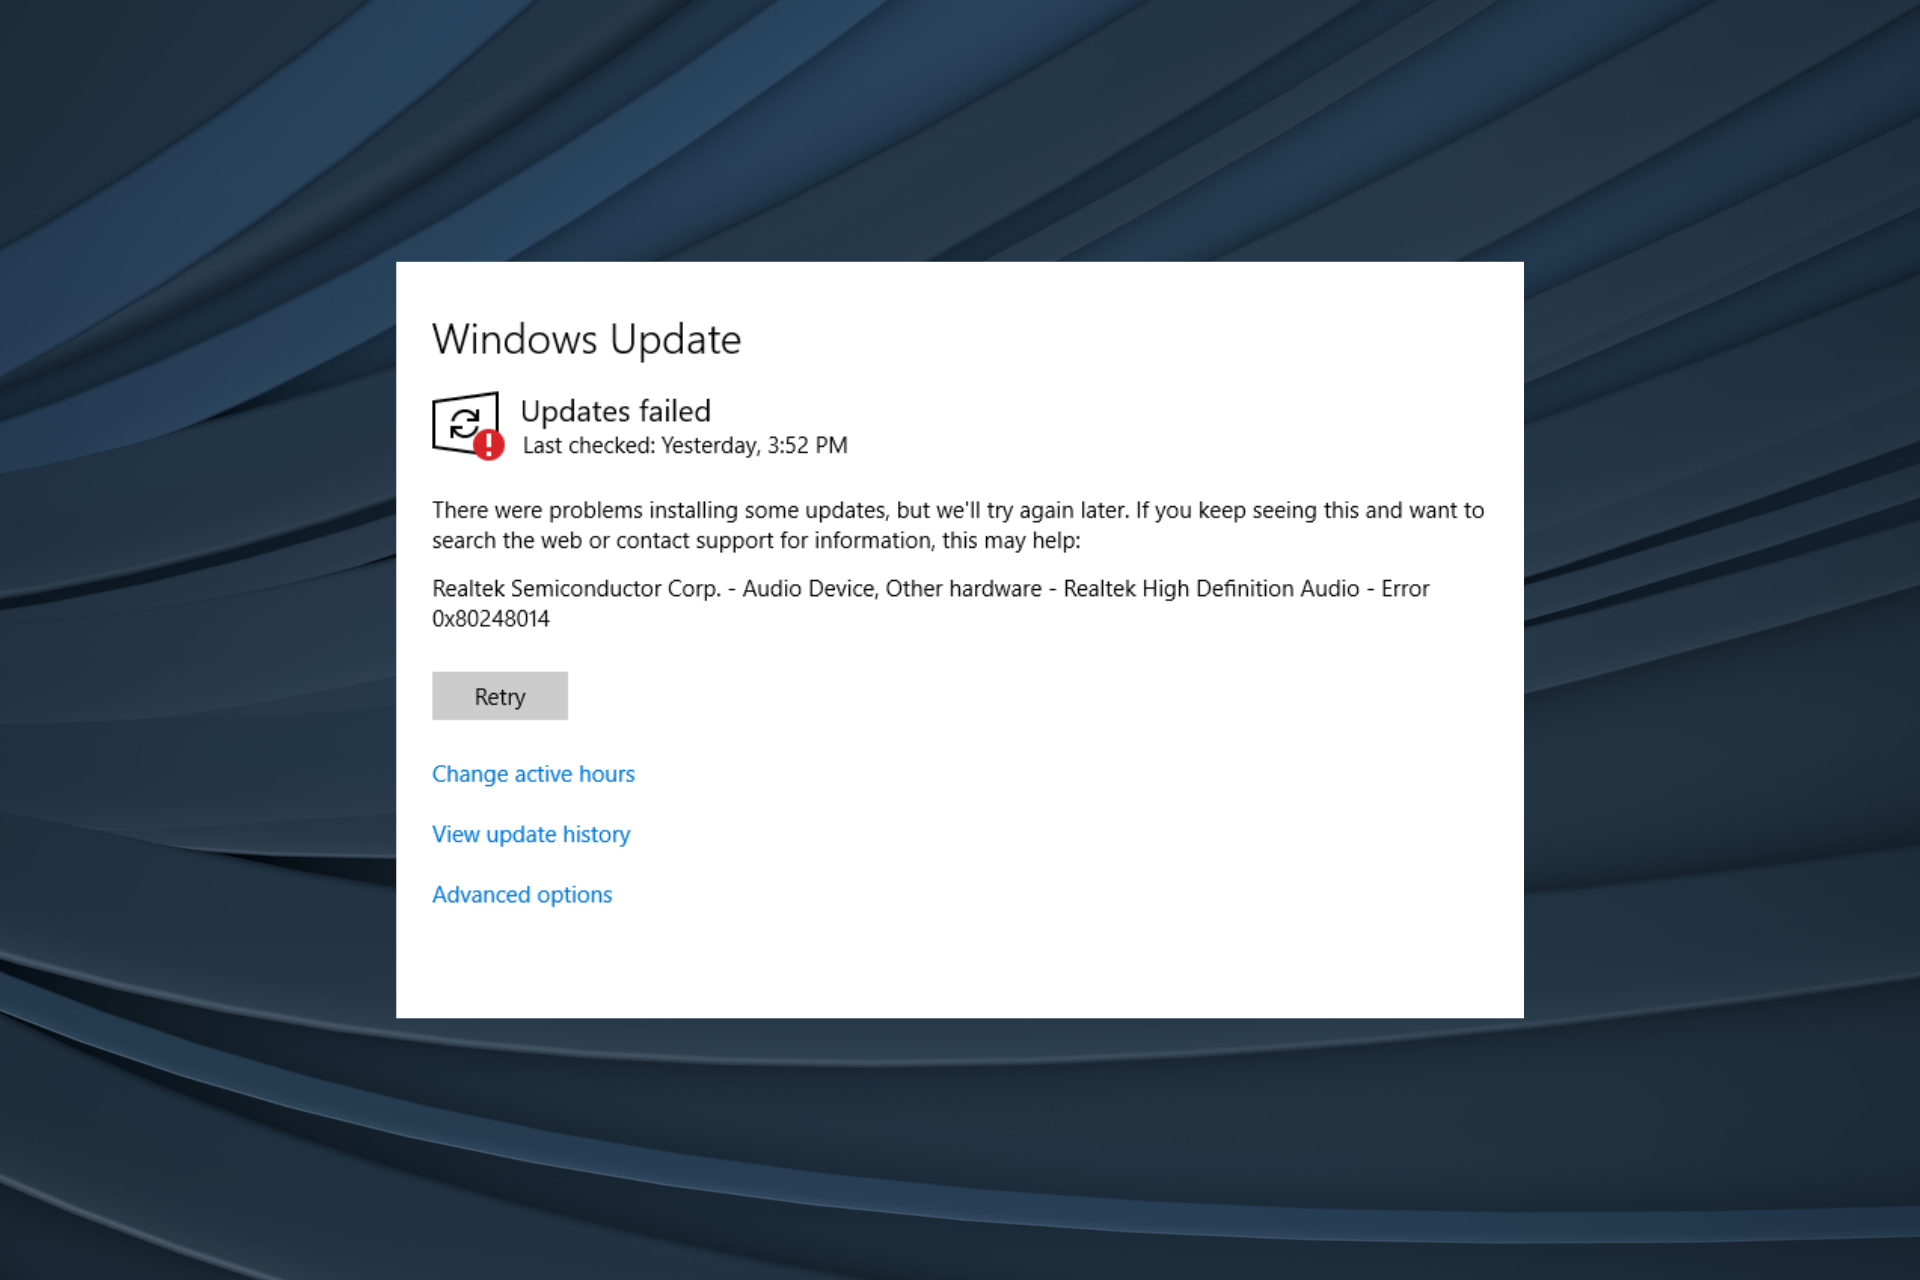 Partition disappears in Windows 10 Anniversary Update